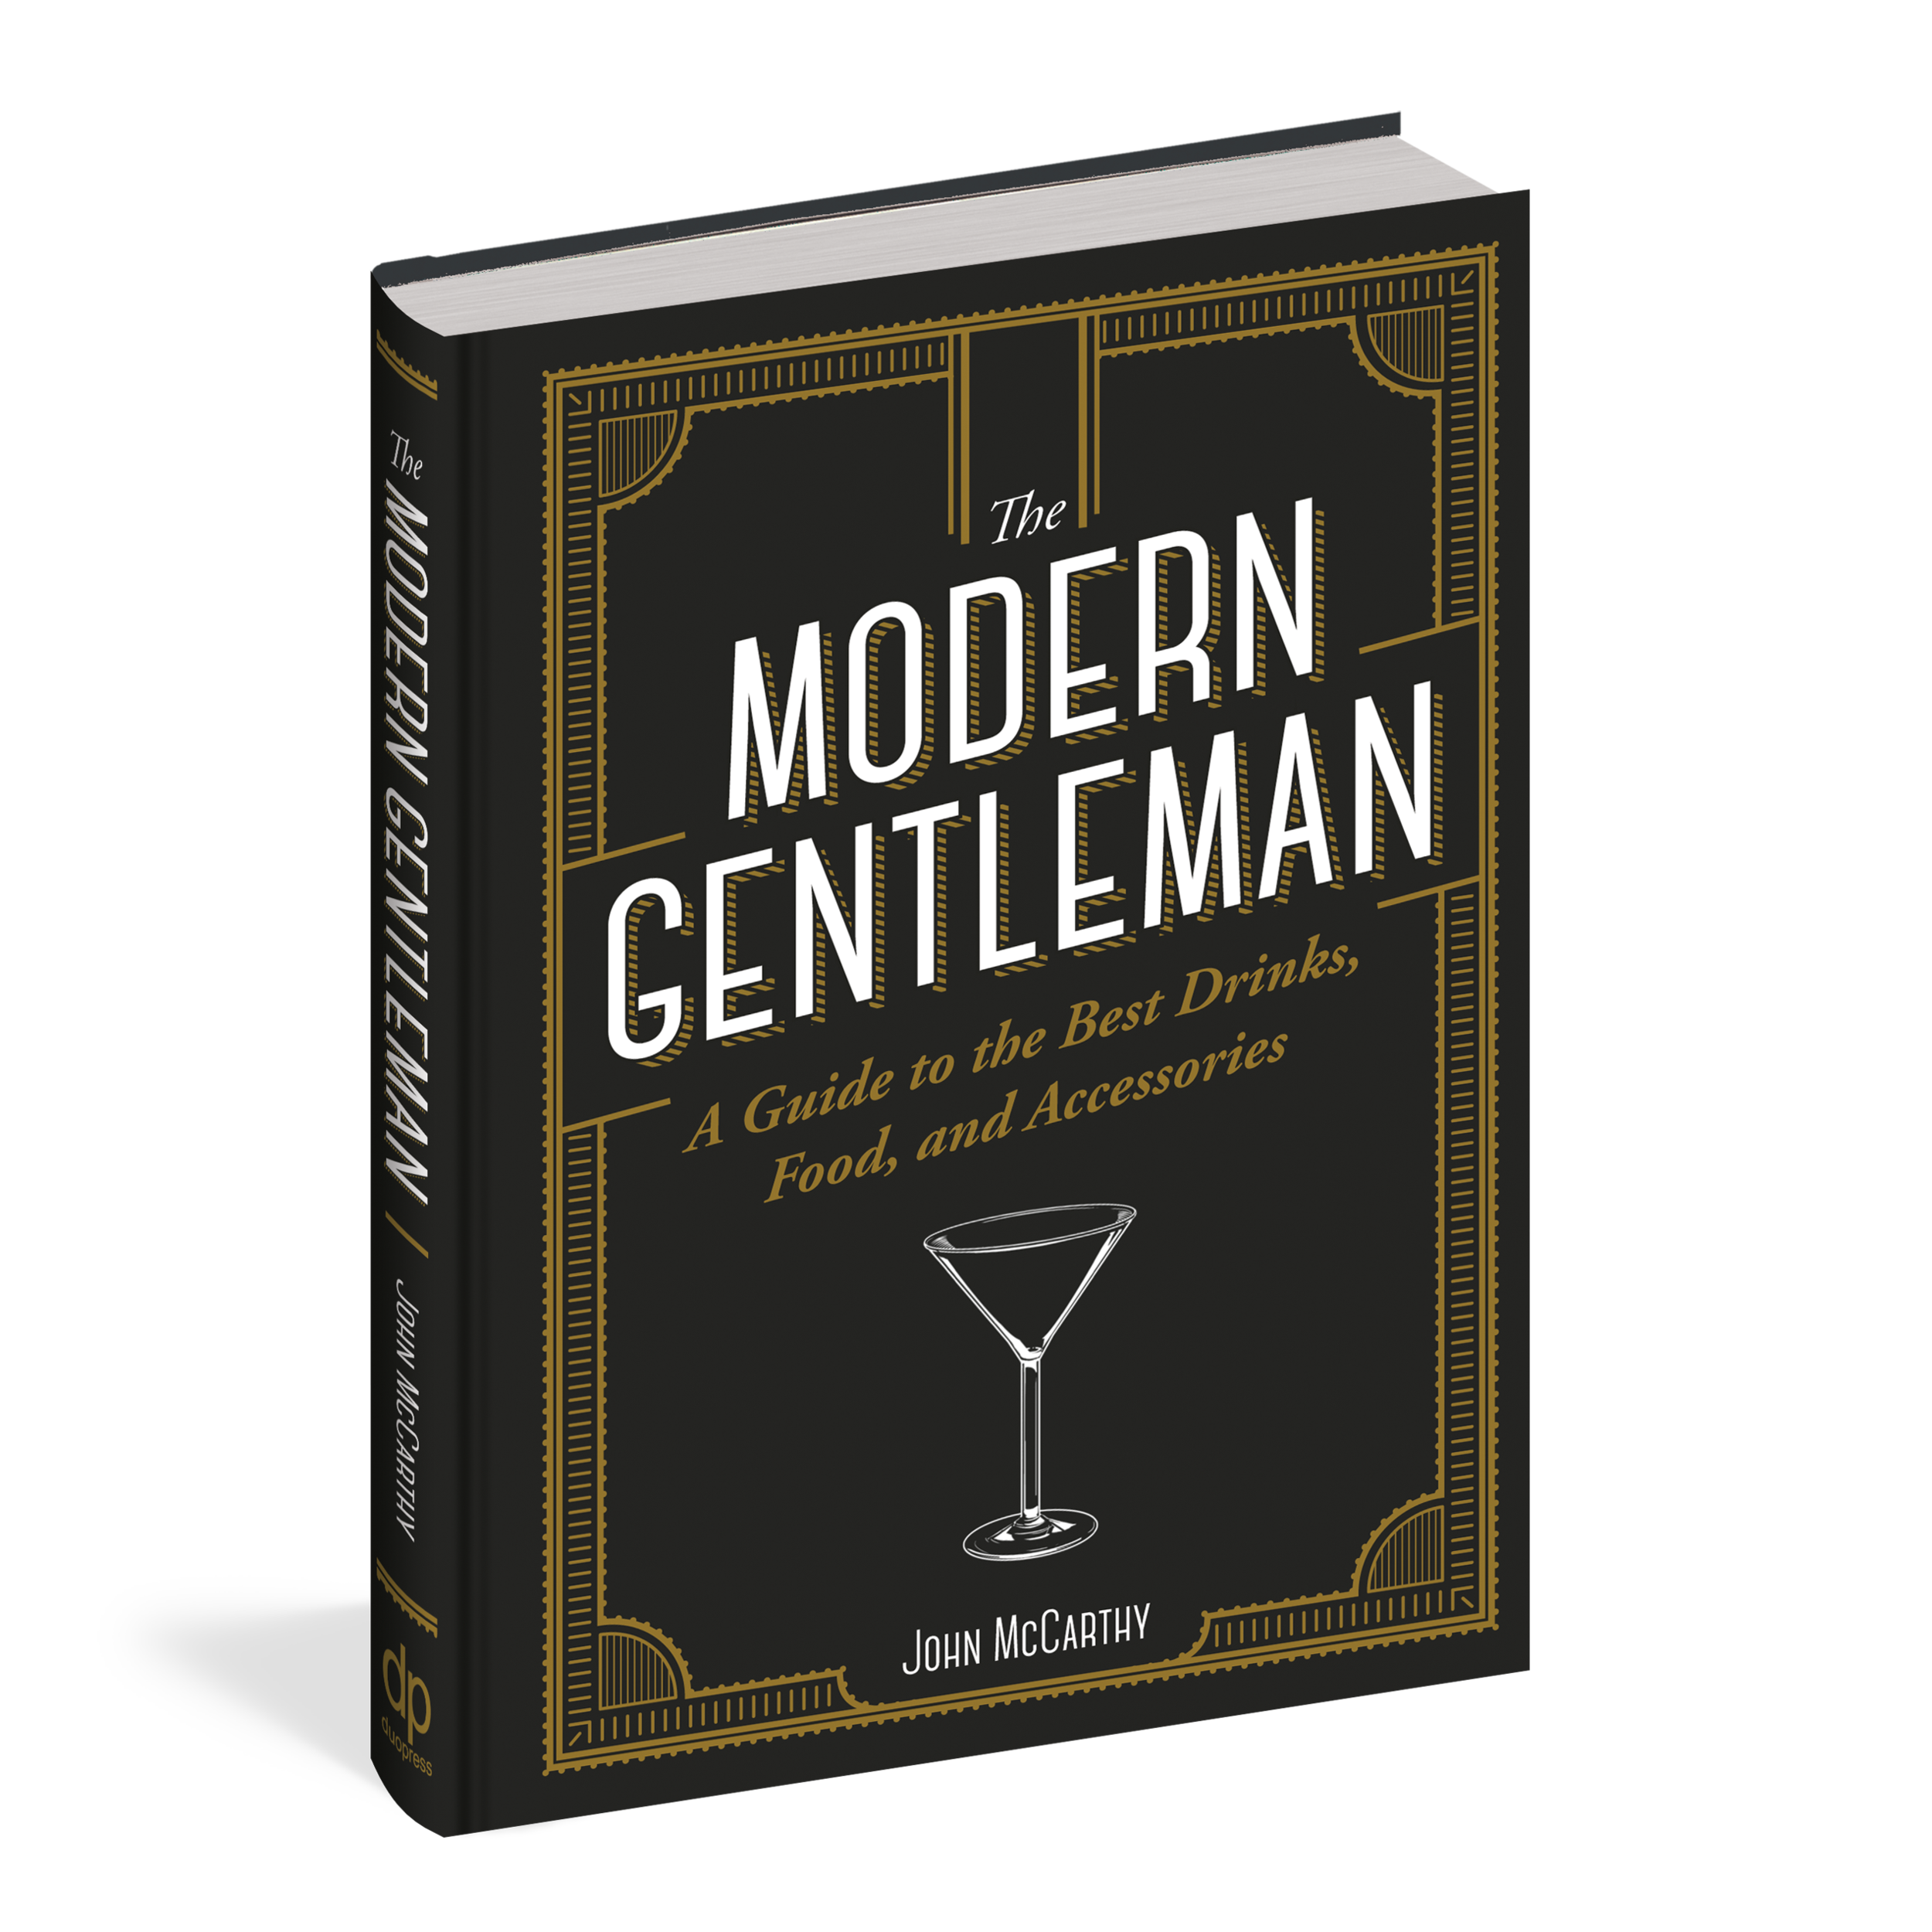 The Modern Gentleman: The Guide to the Best Food, Drinks, and Accessories (Copy) (Copy) (Copy)